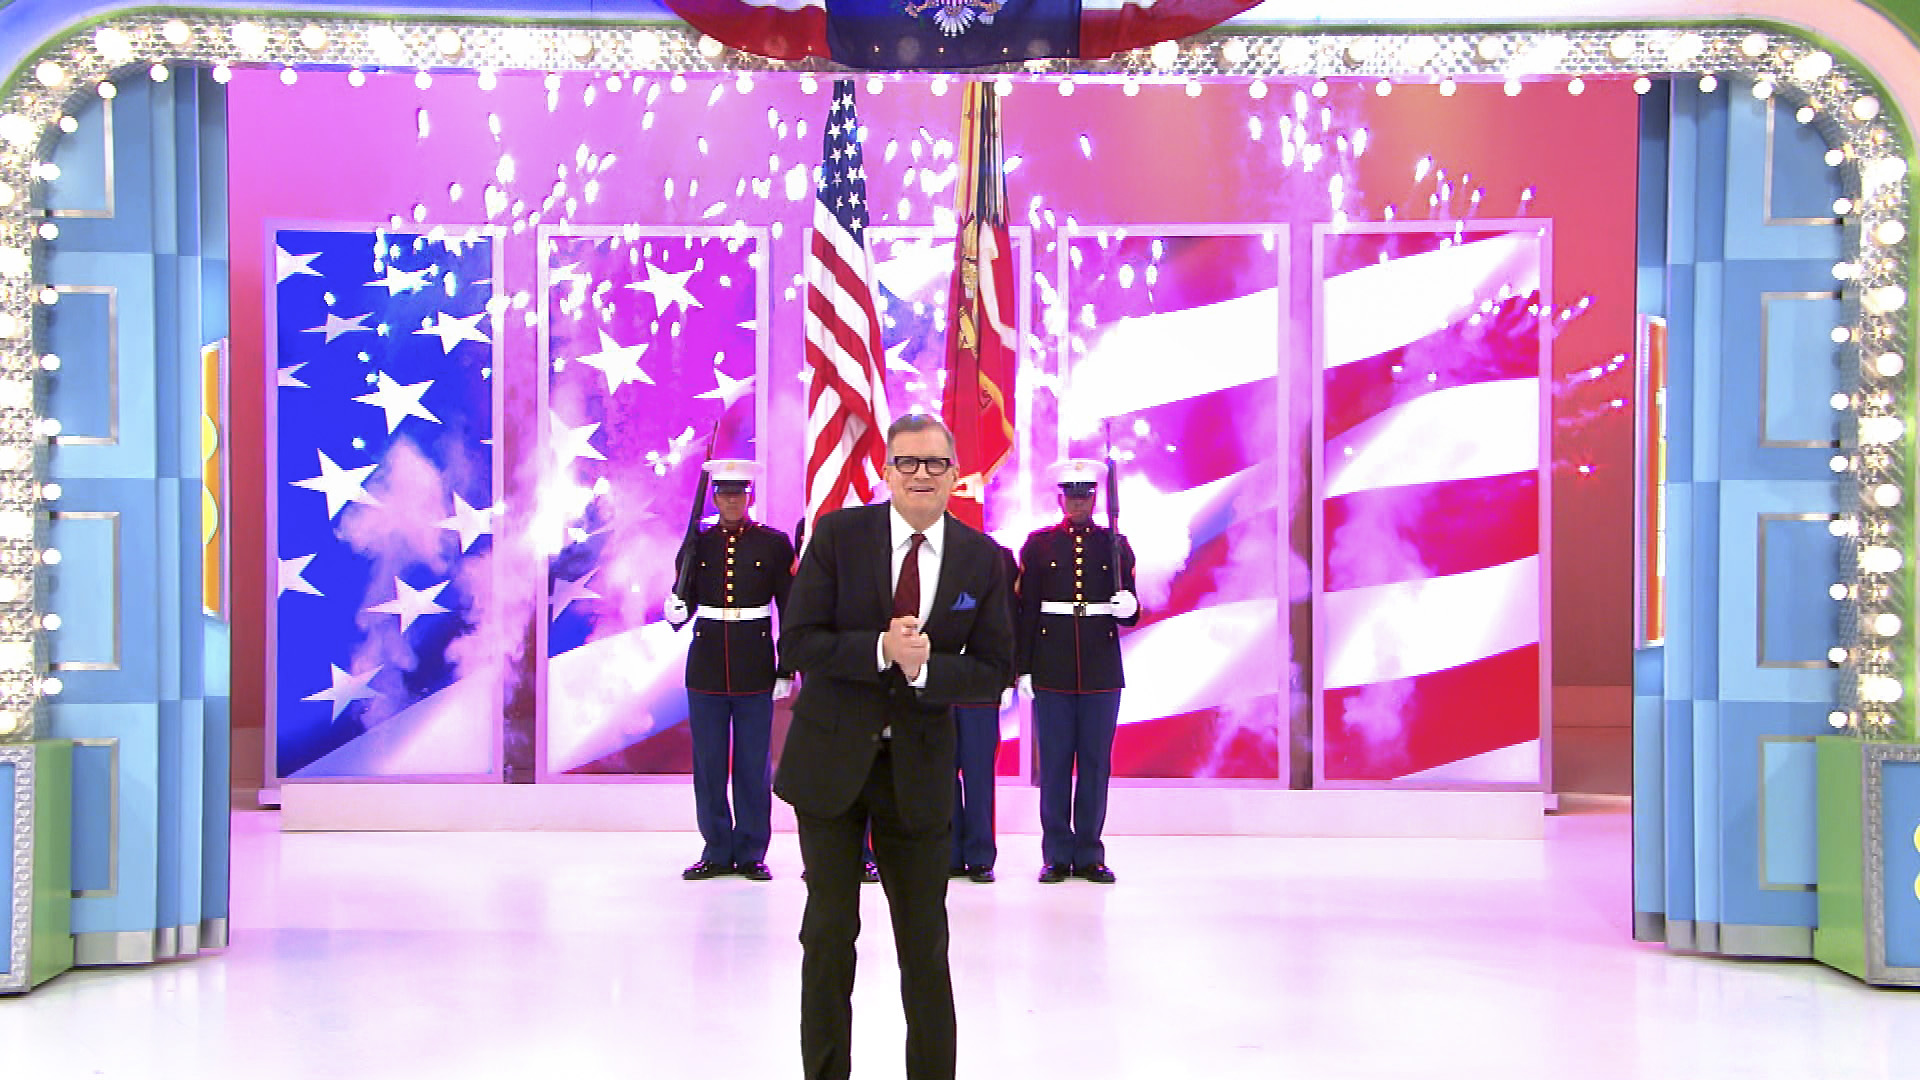 Drew Carey Celebrates with an Audience of Service Men and Women